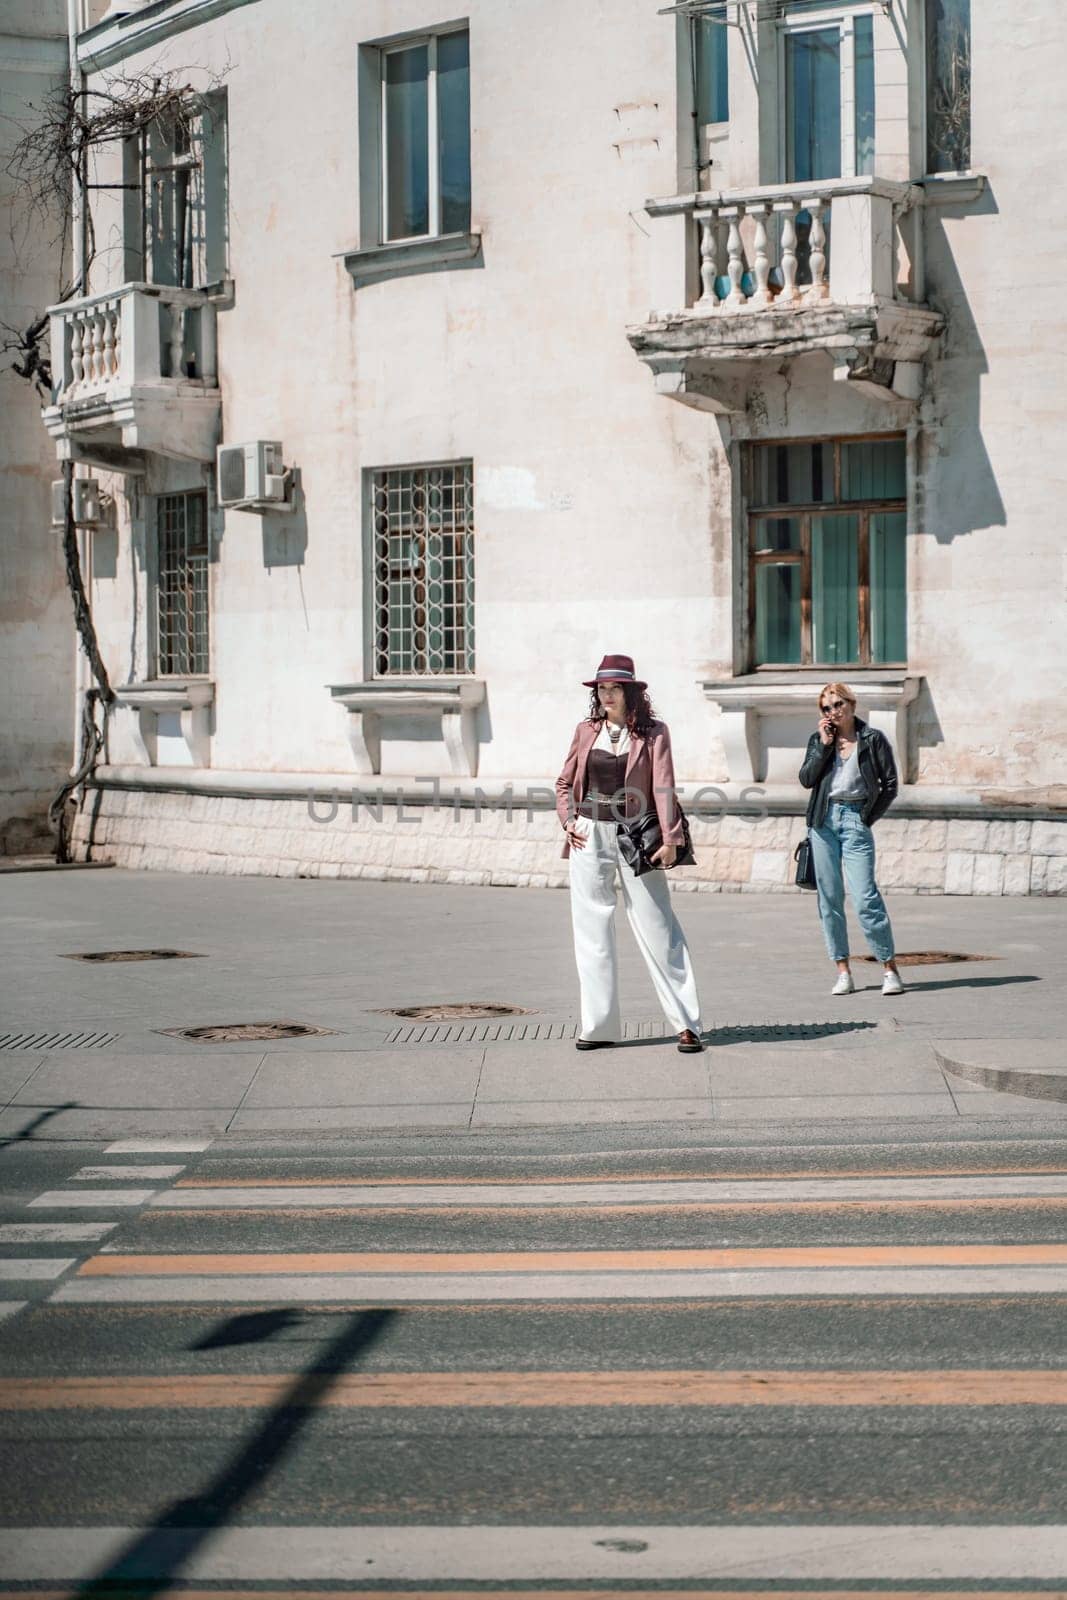 Woman city road crossing. Stylish woman in a hat crosses the road at a pedestrian crossing in the city. Dressed in white trousers and a jacket with a bag in her hands